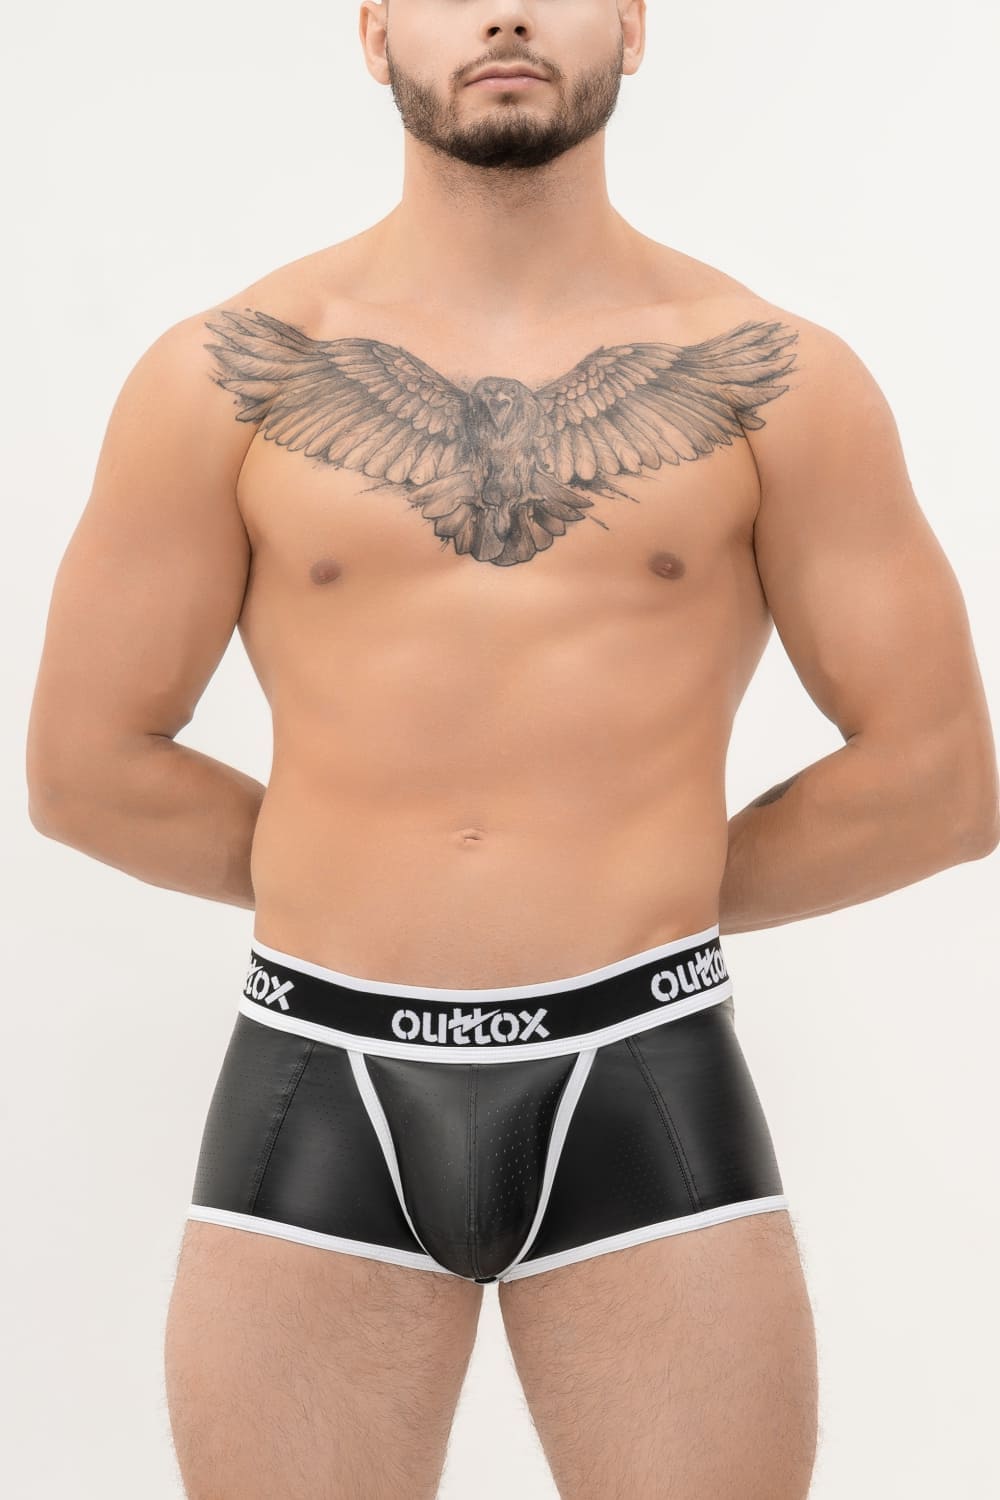 Outtox. Wrapped Rear Trunk Shorts with Snap Codpiece. Black+White